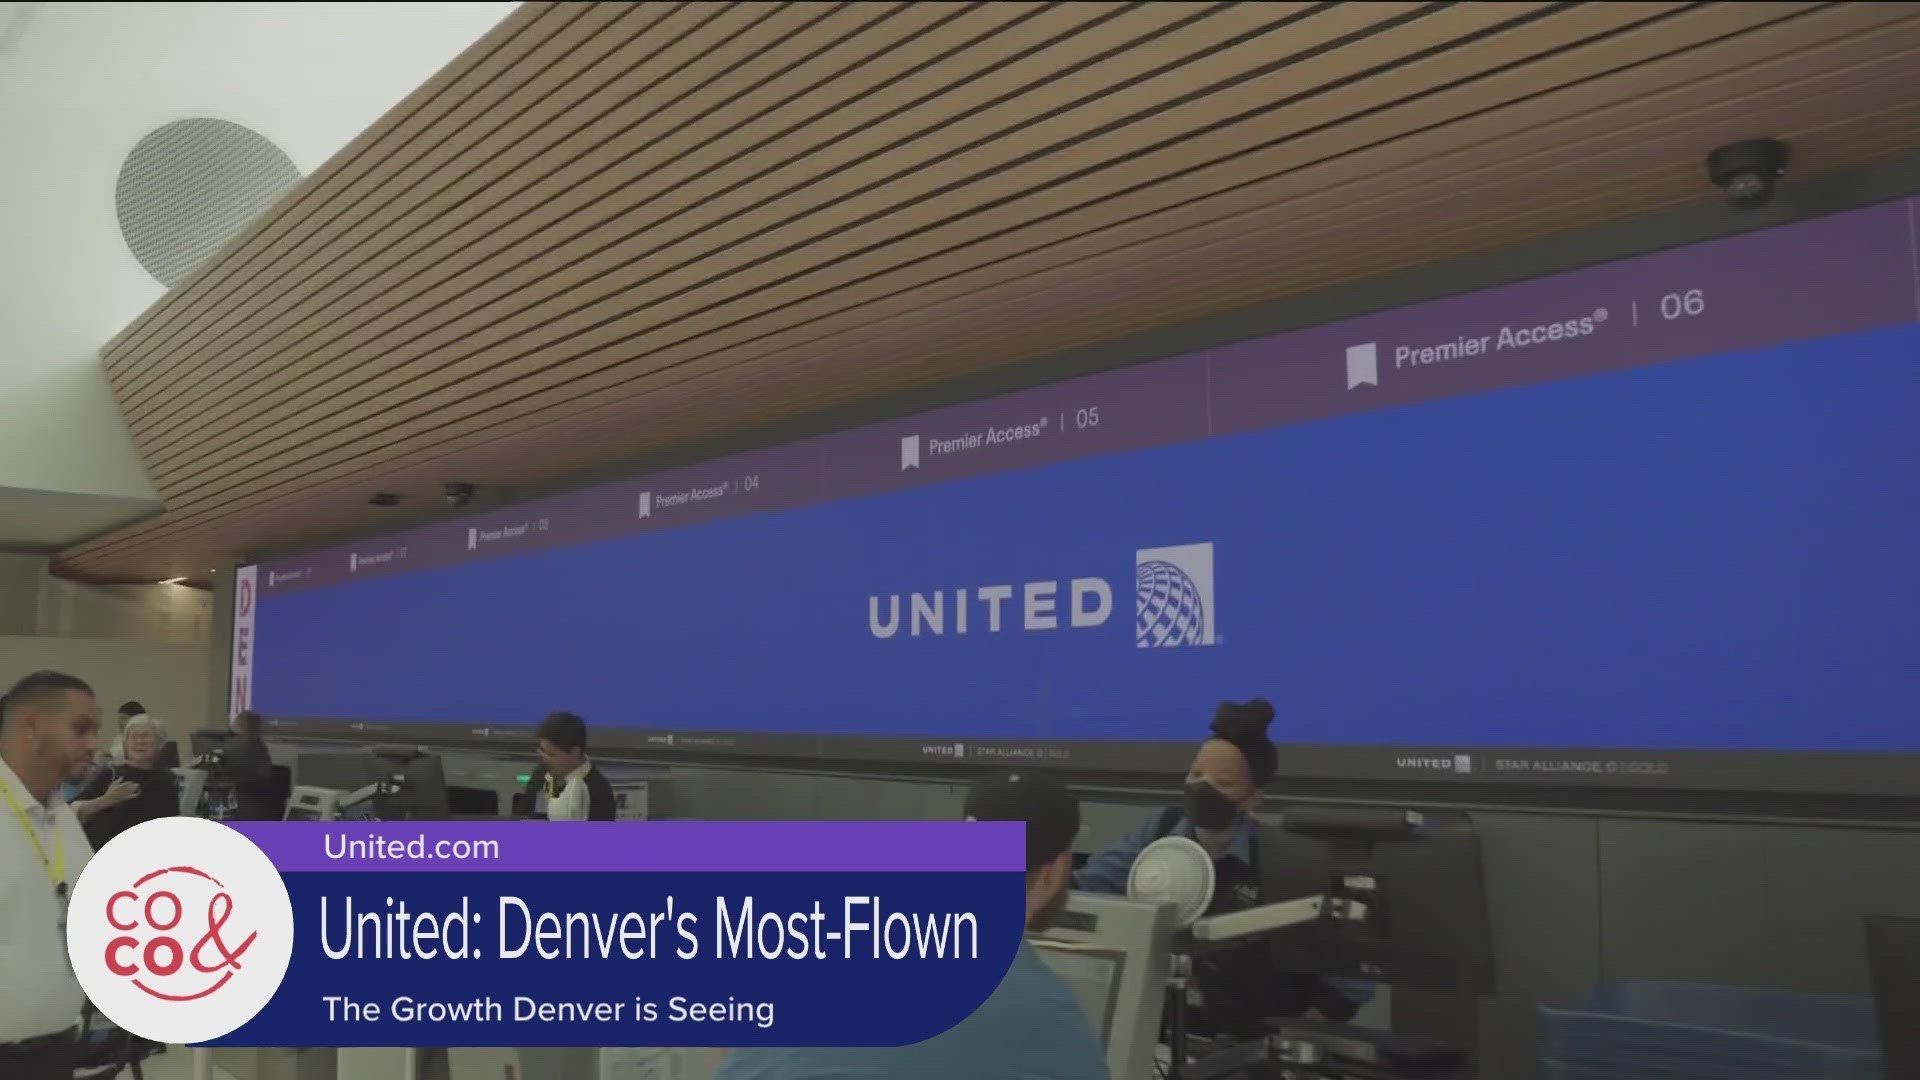 United Airlines' new upgrades will be rolling out to Denver in the coming years.